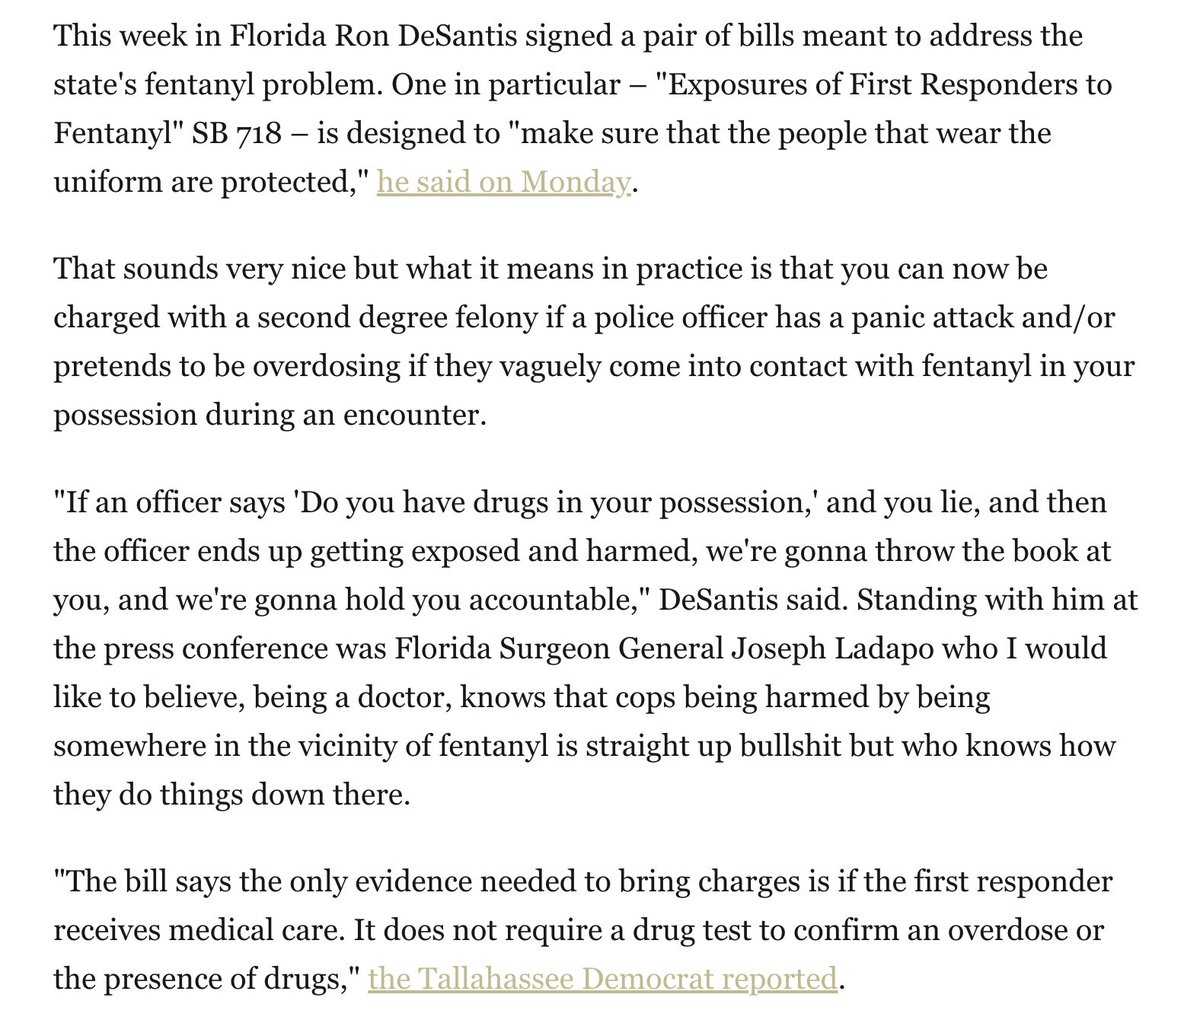 In FL you can now be charged with a felony if a cop has a panic attack and/or pretends to be overdosing if they vaguely come into contact with fentanyl in your possession during an encounter. It does not have to later be proved medically they were exposed. welcometohellworld.com/see-the-moon/